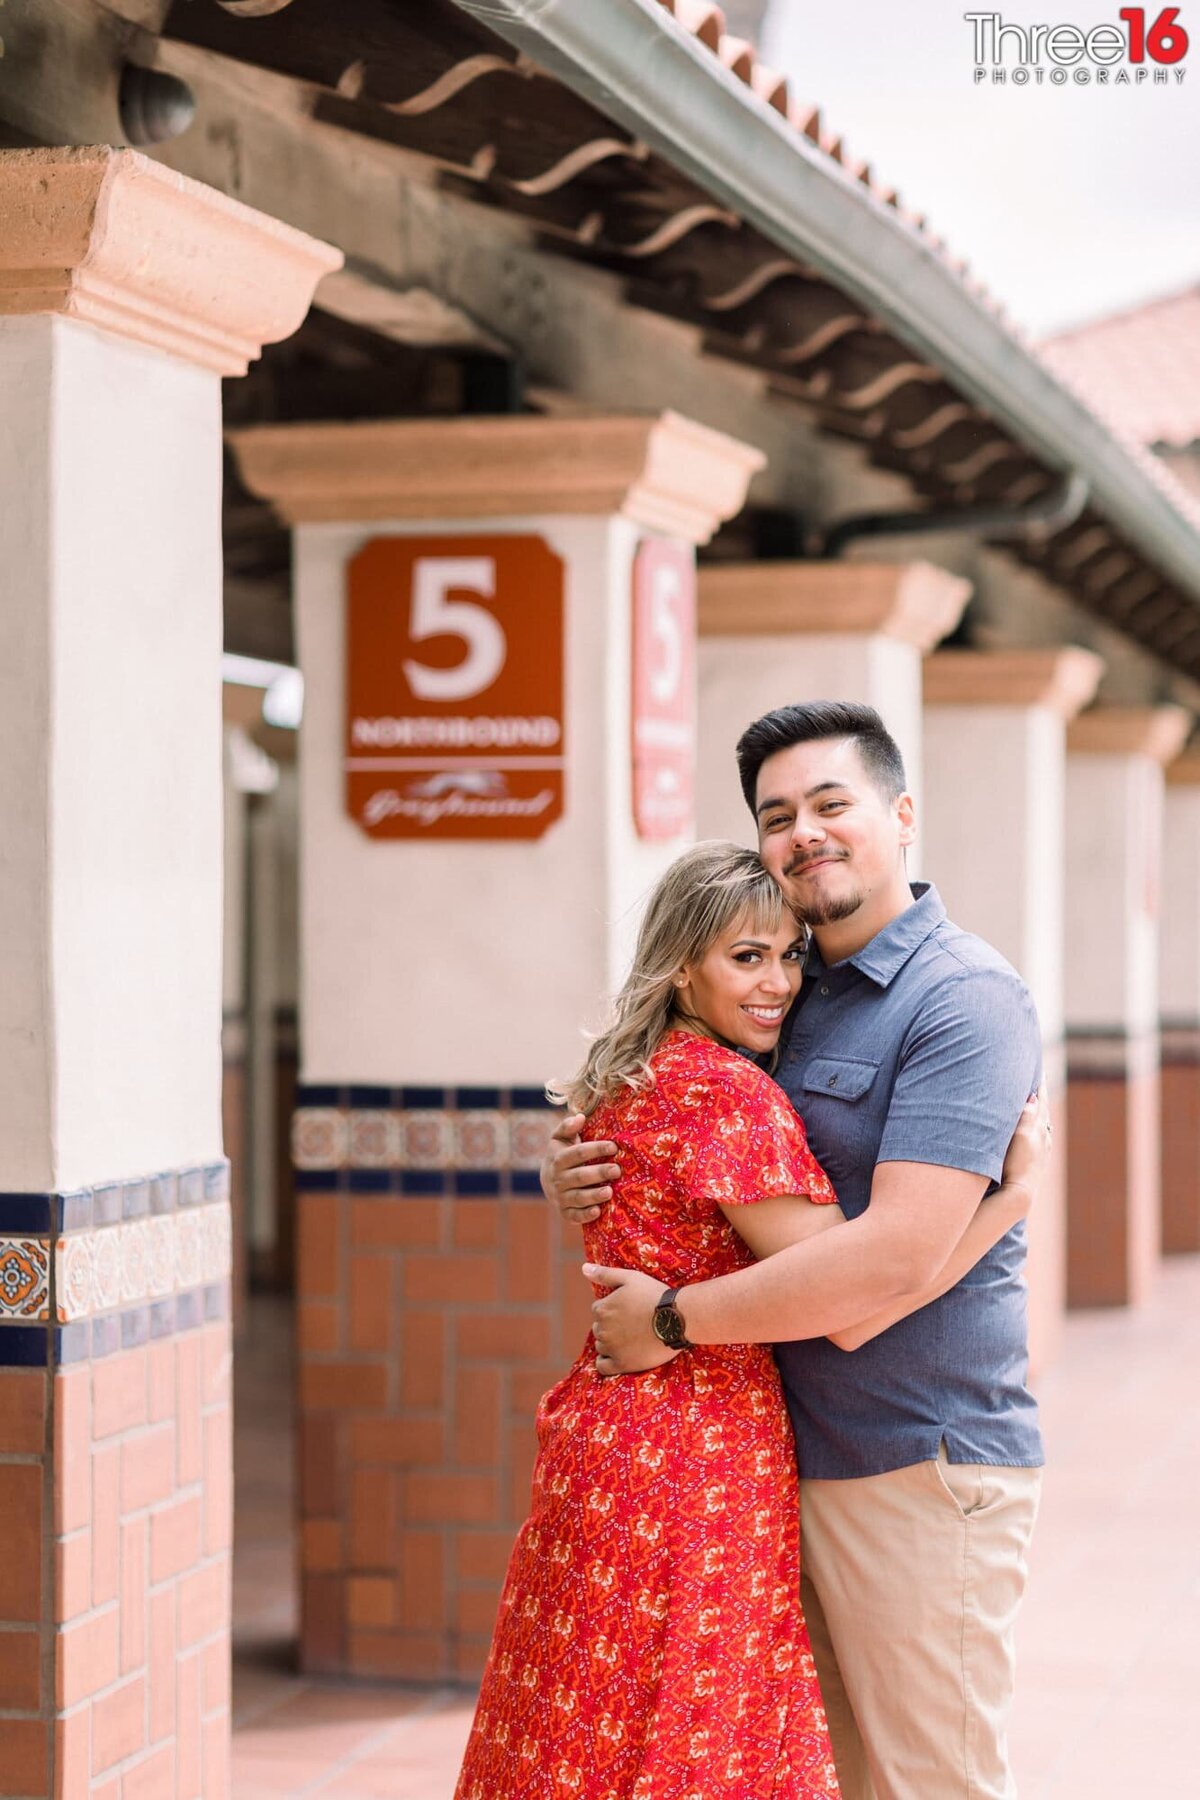 Engaged couple embrace each other on the dock at the Santa Ana Train Station